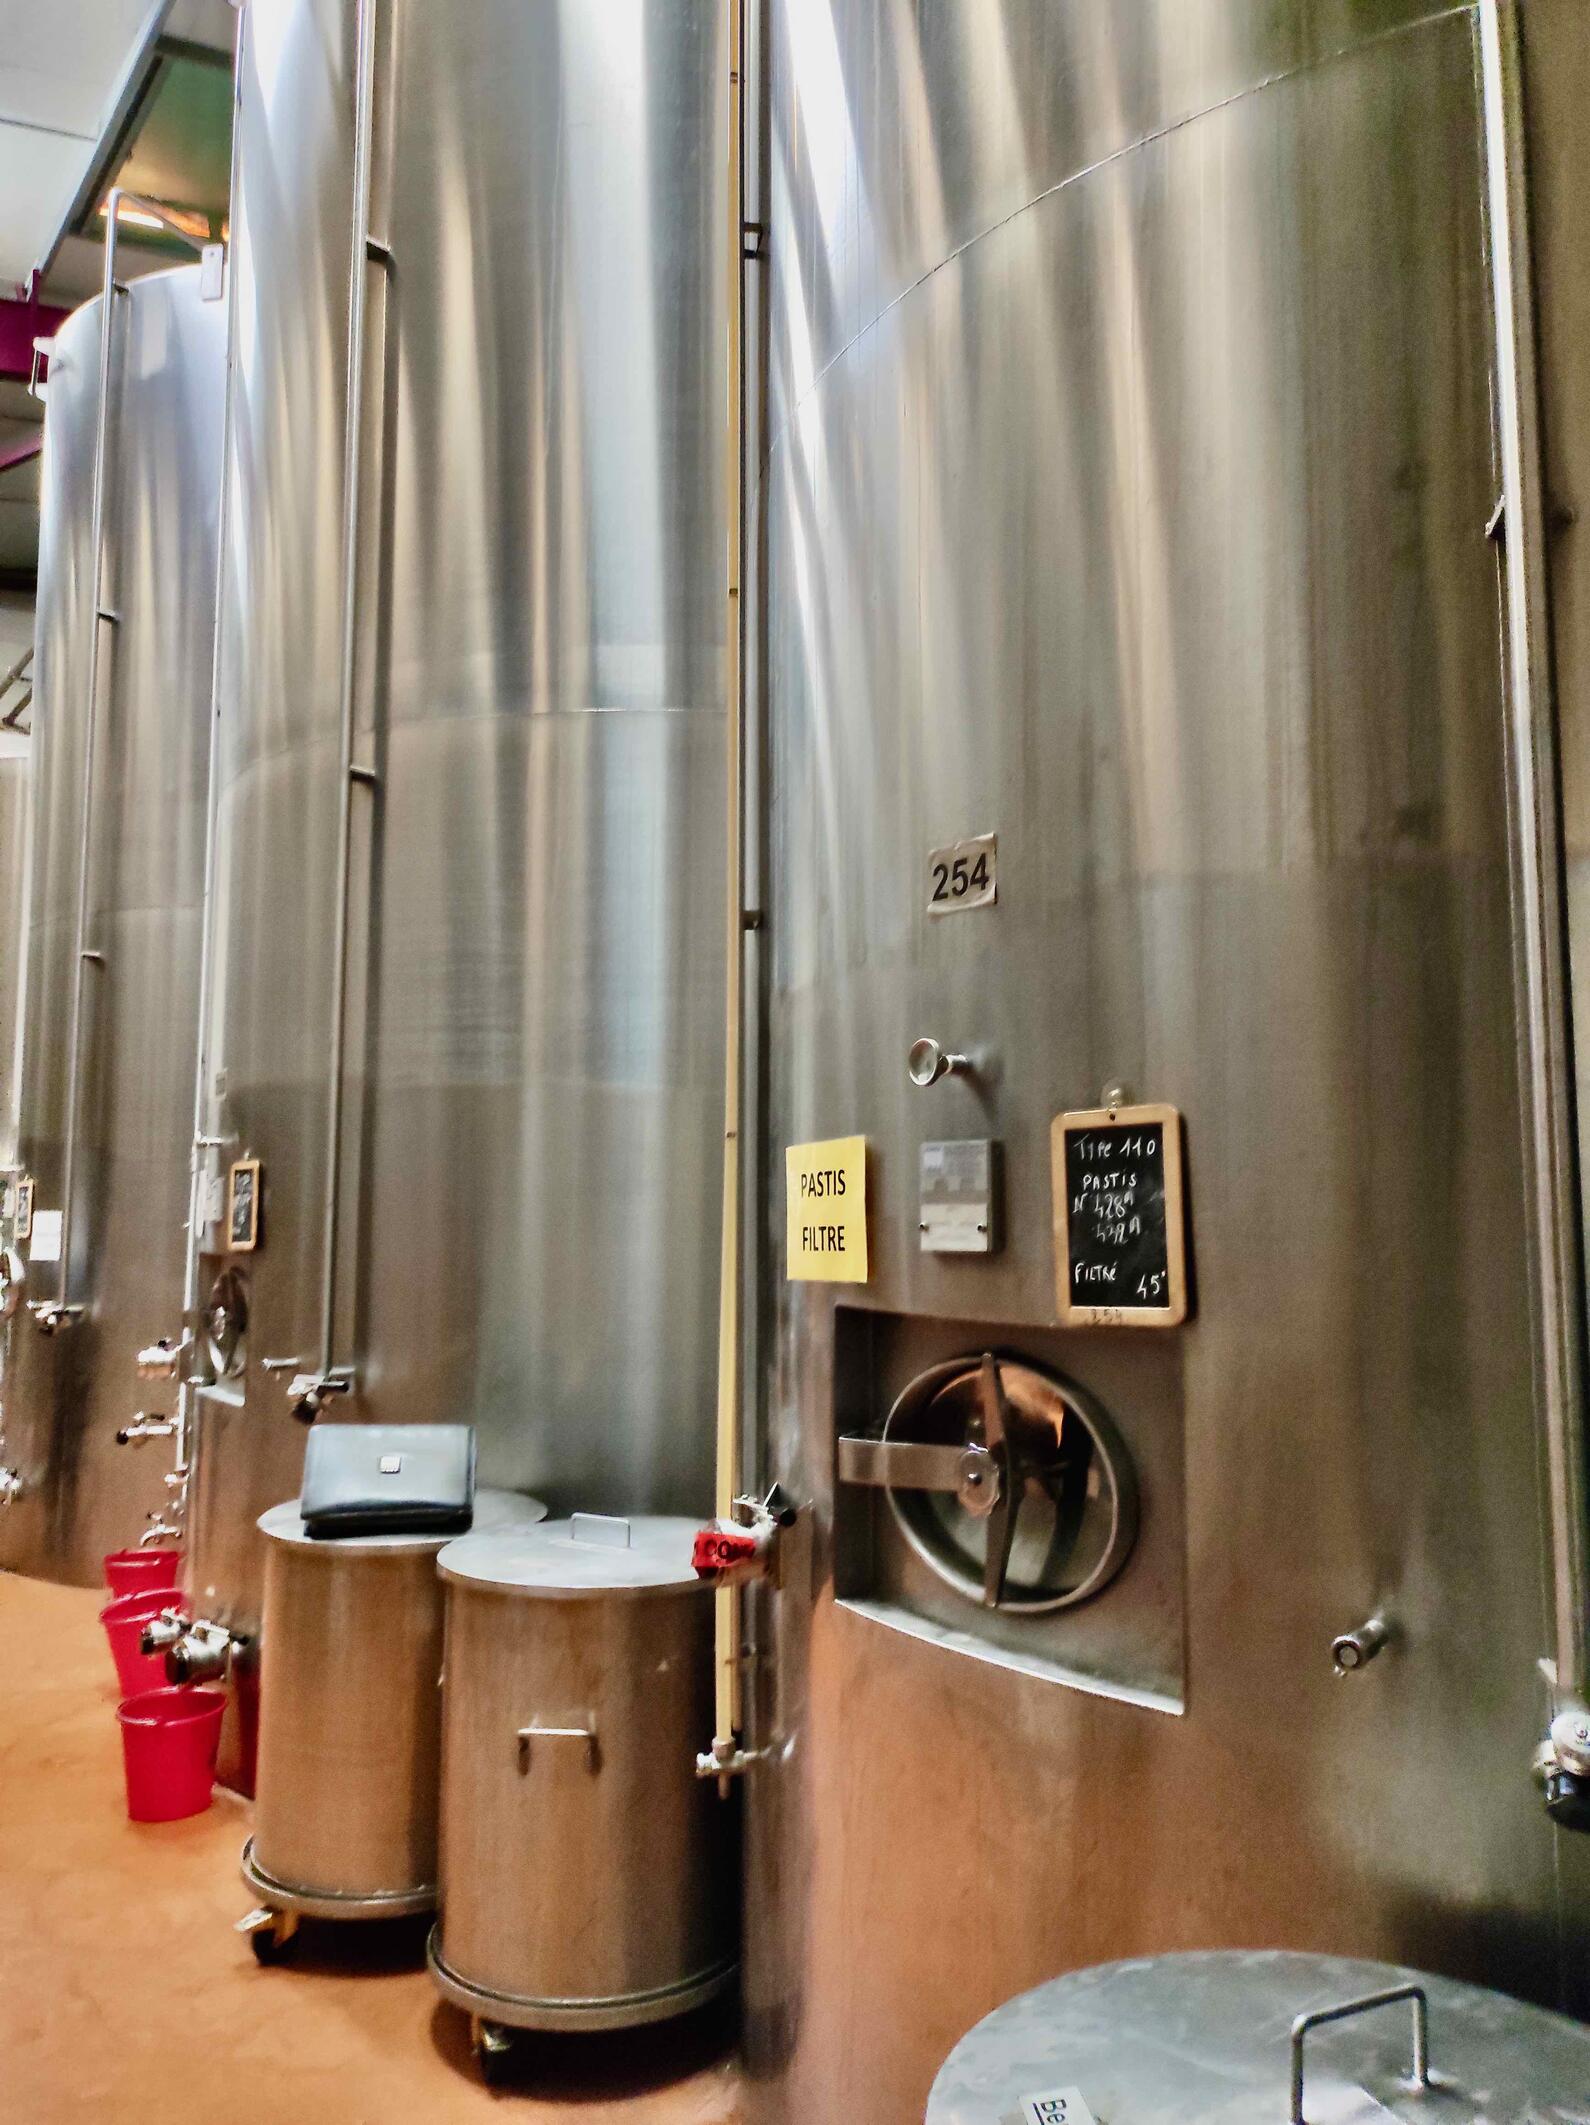 316L stainless steel tank - Closed - Insulated